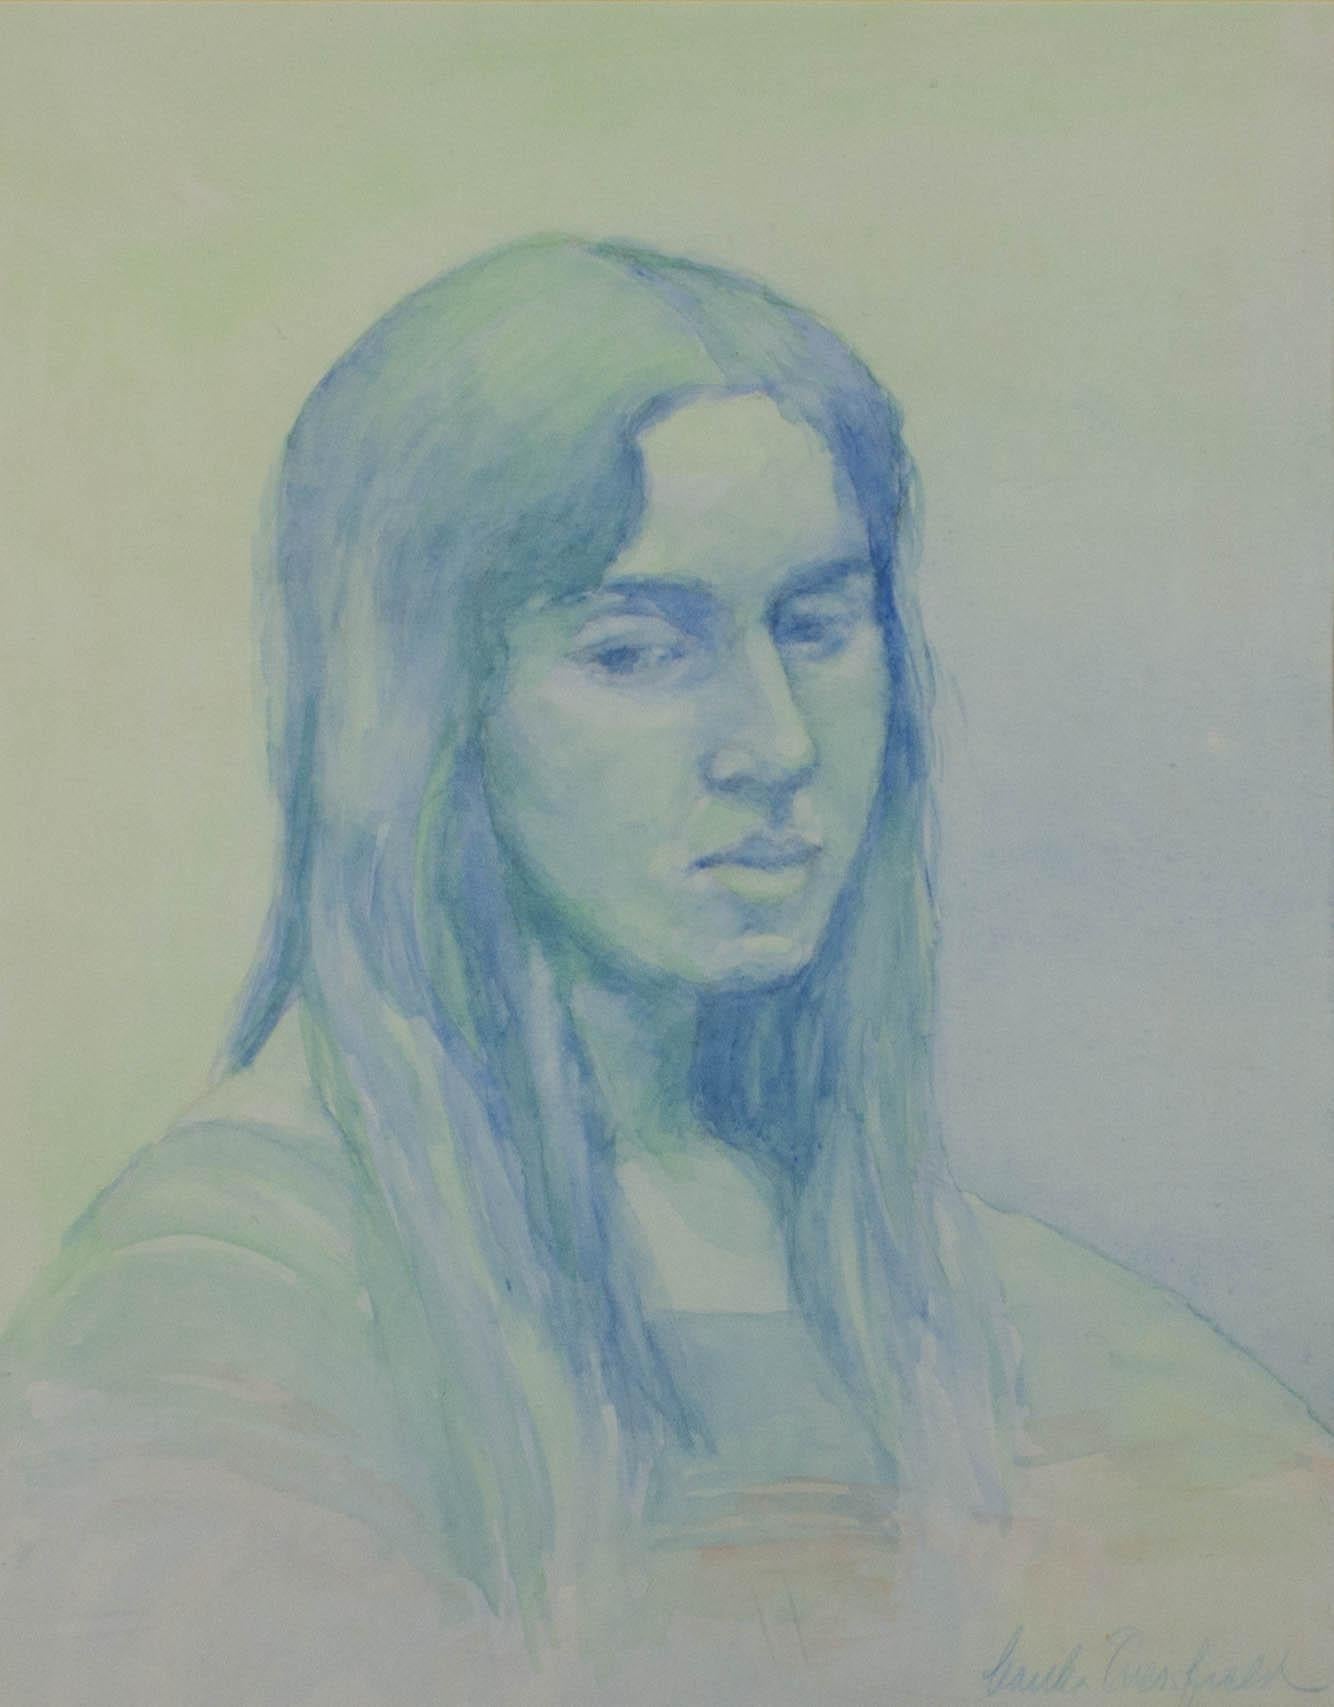 A delicate portrait in watercolour showing a woman, deep in thought. The artist has used a soft palette to add the the contemplative tone of the portrait. The artist has signed to the lower right and the painting has been presented in a white frame